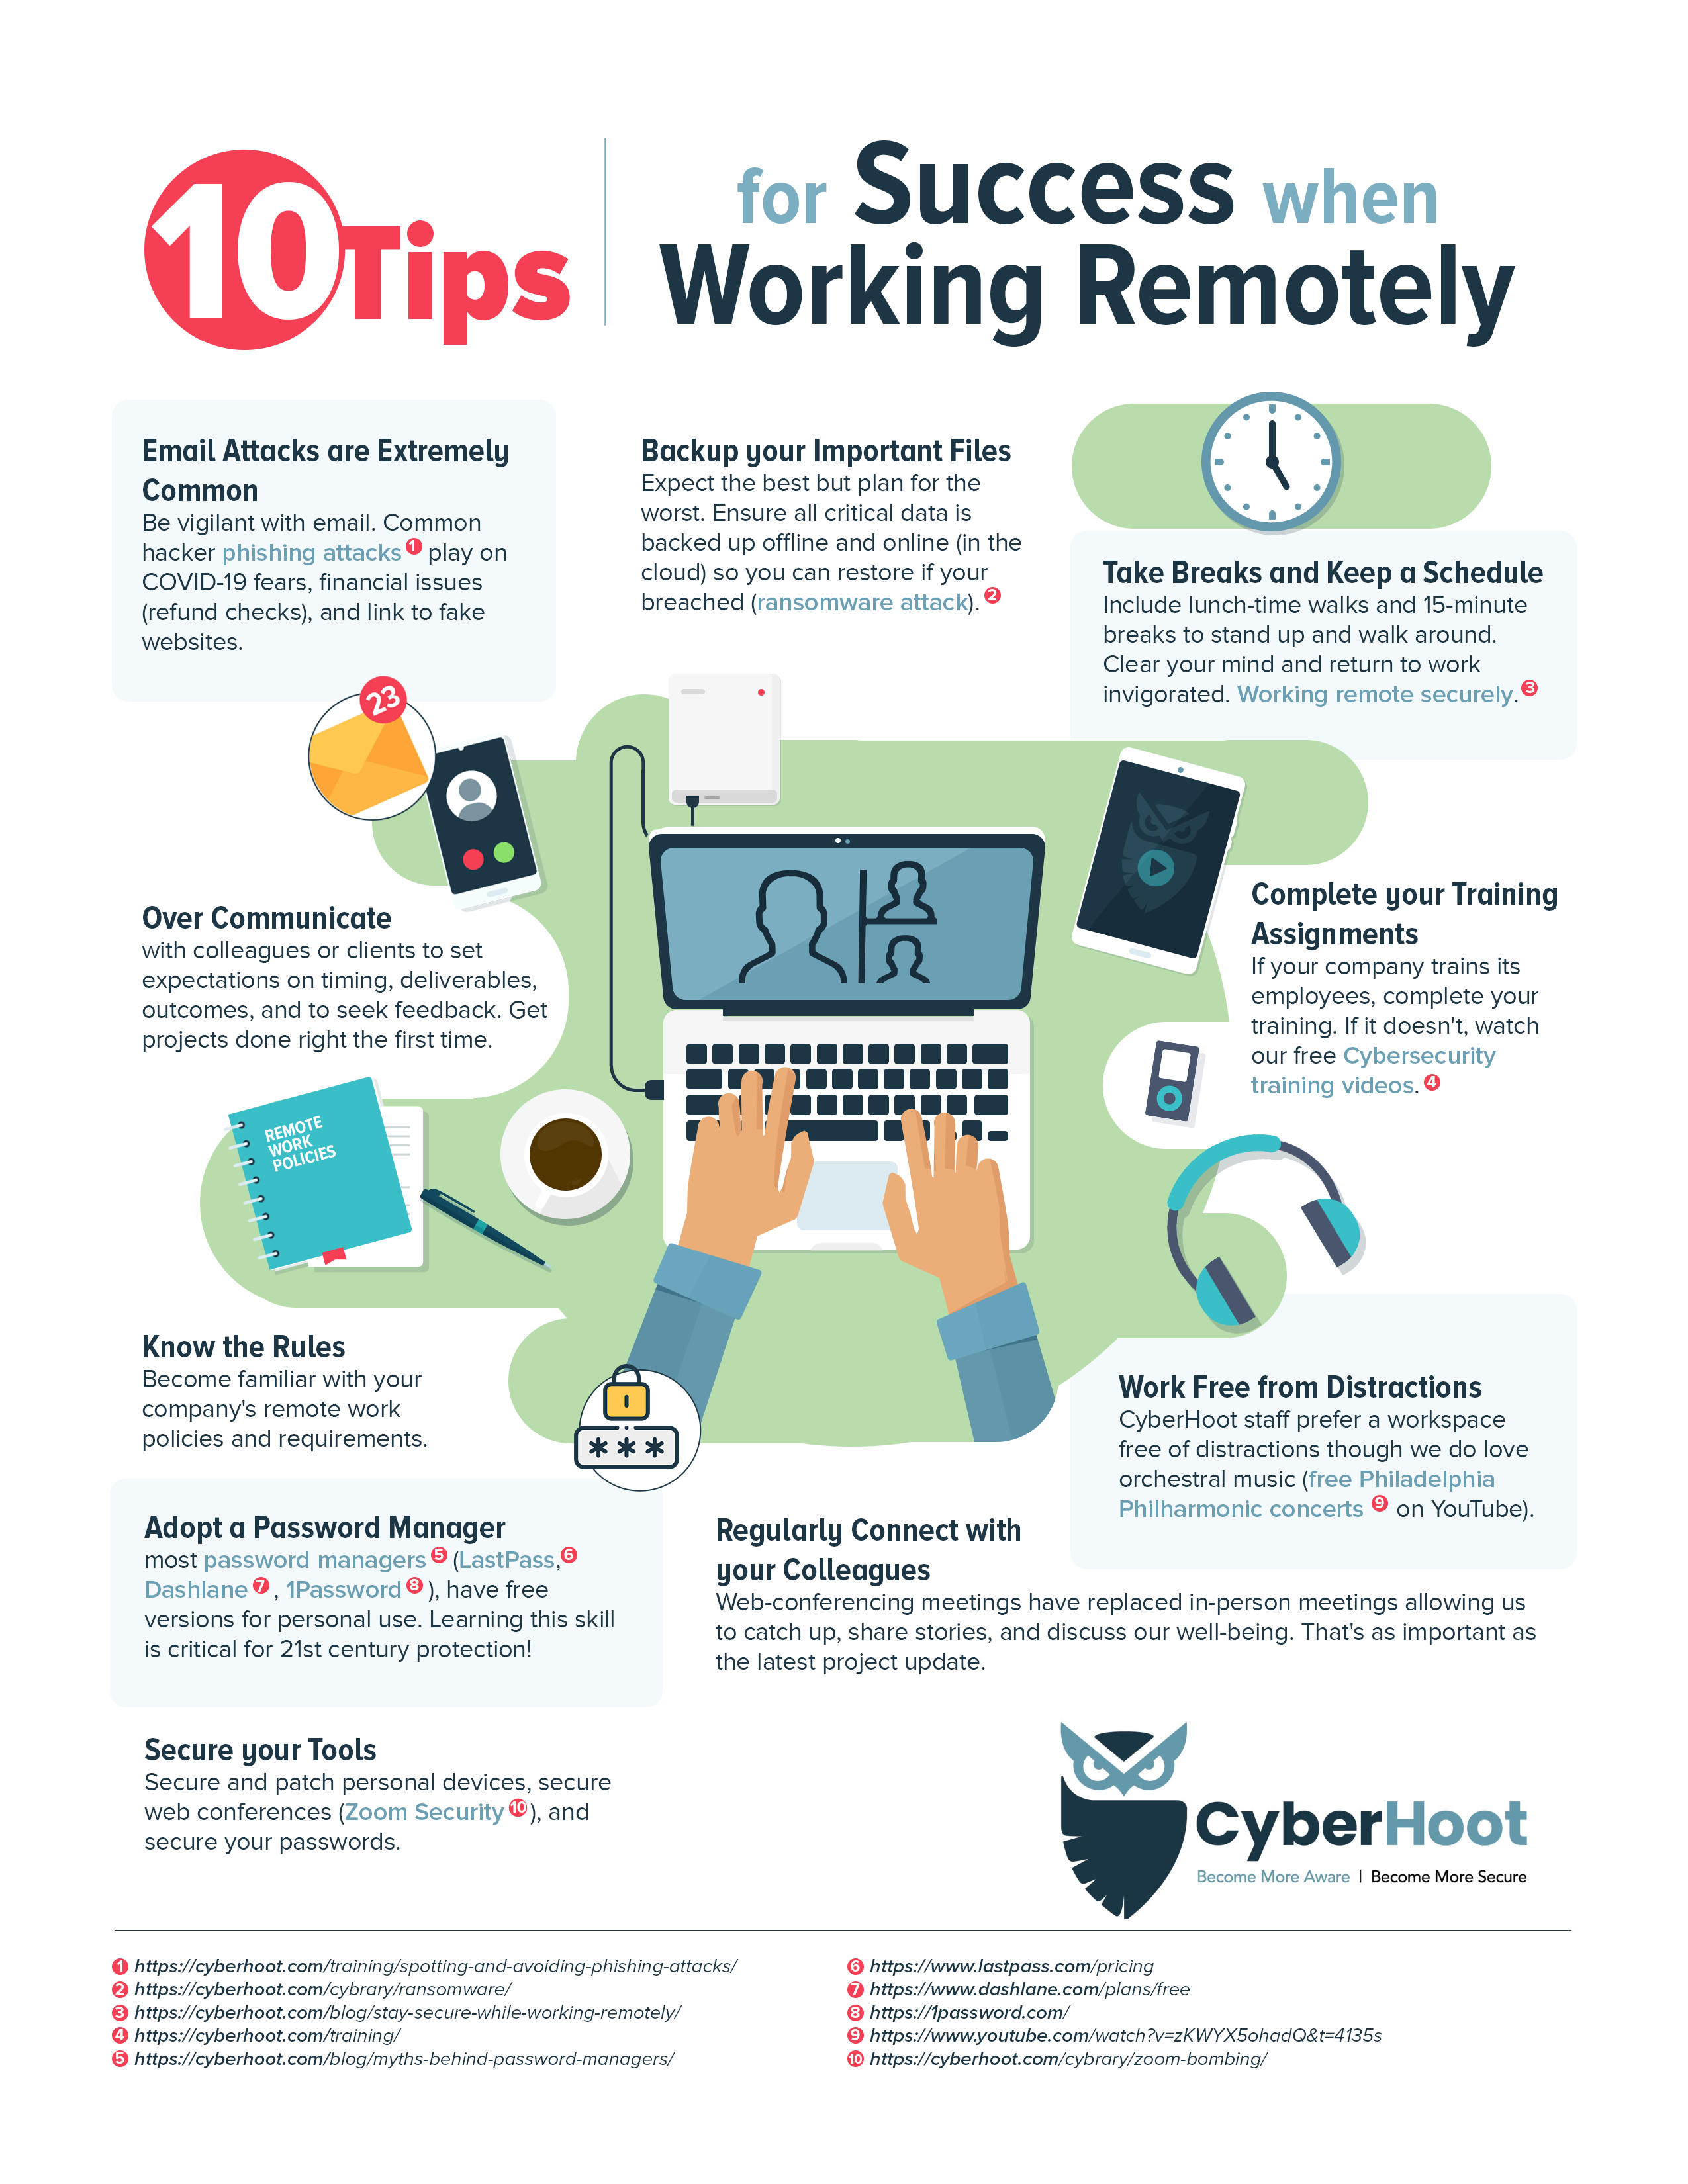 best jobs to work remotely by computer